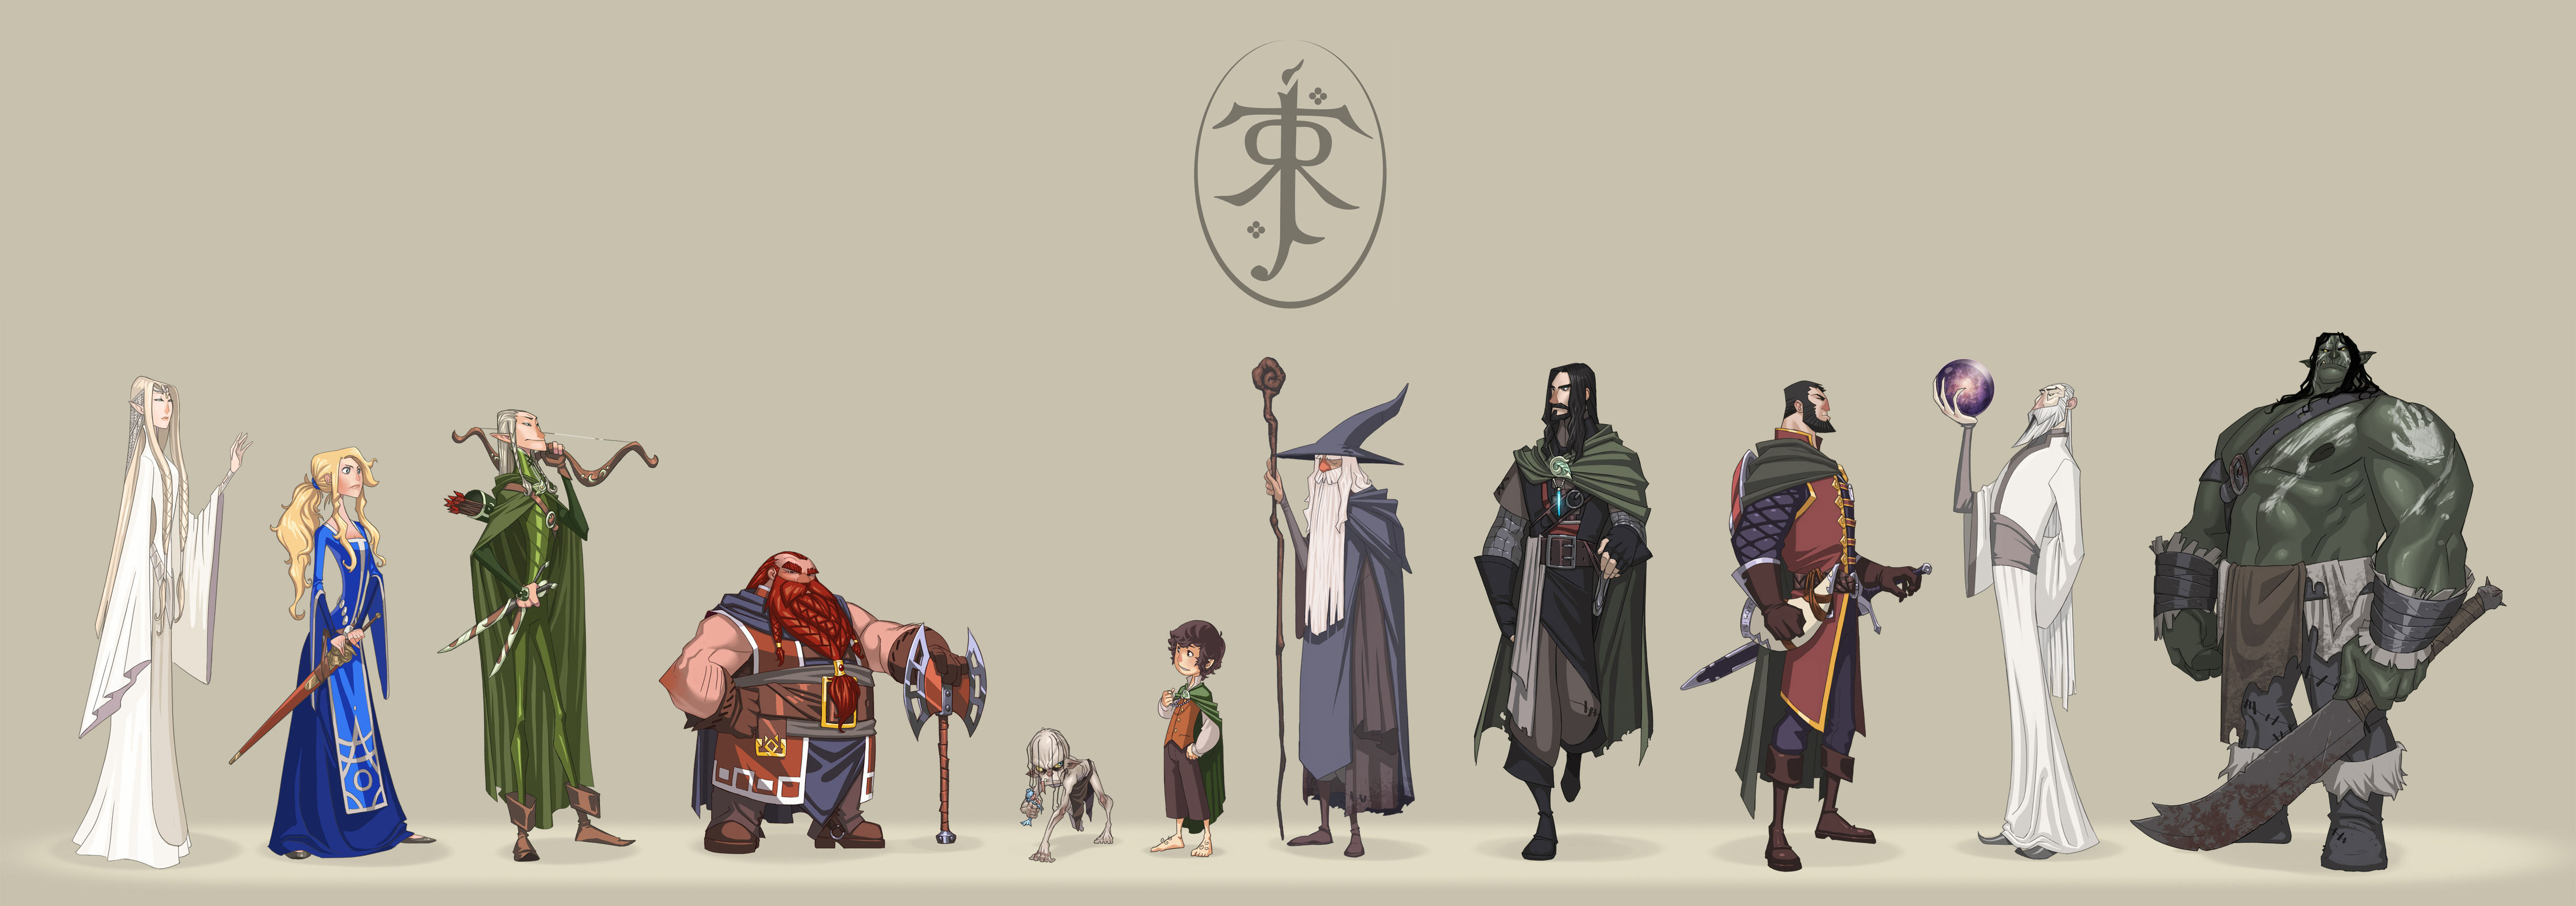 The Lord of the Rings by omarito on DeviantArt